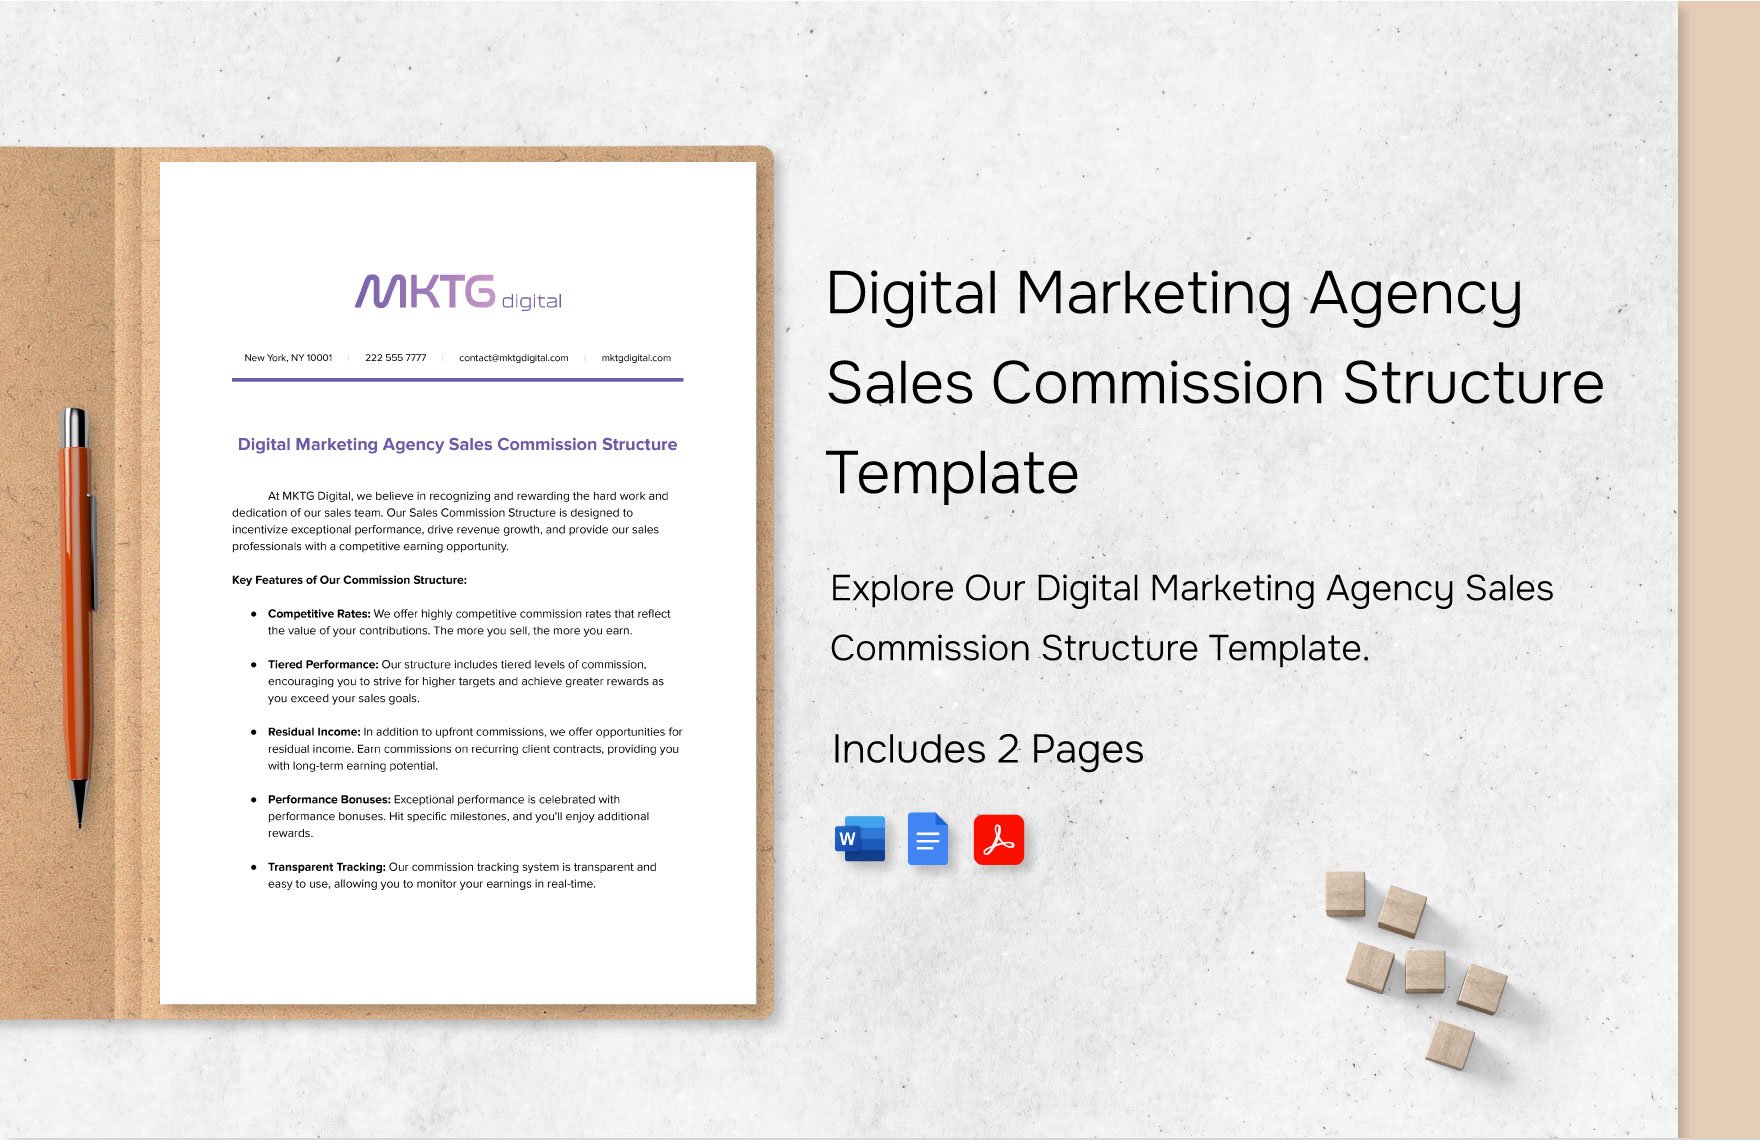 Digital Marketing Agency Sales Commission Structure Template in Word, Google Docs, PDF